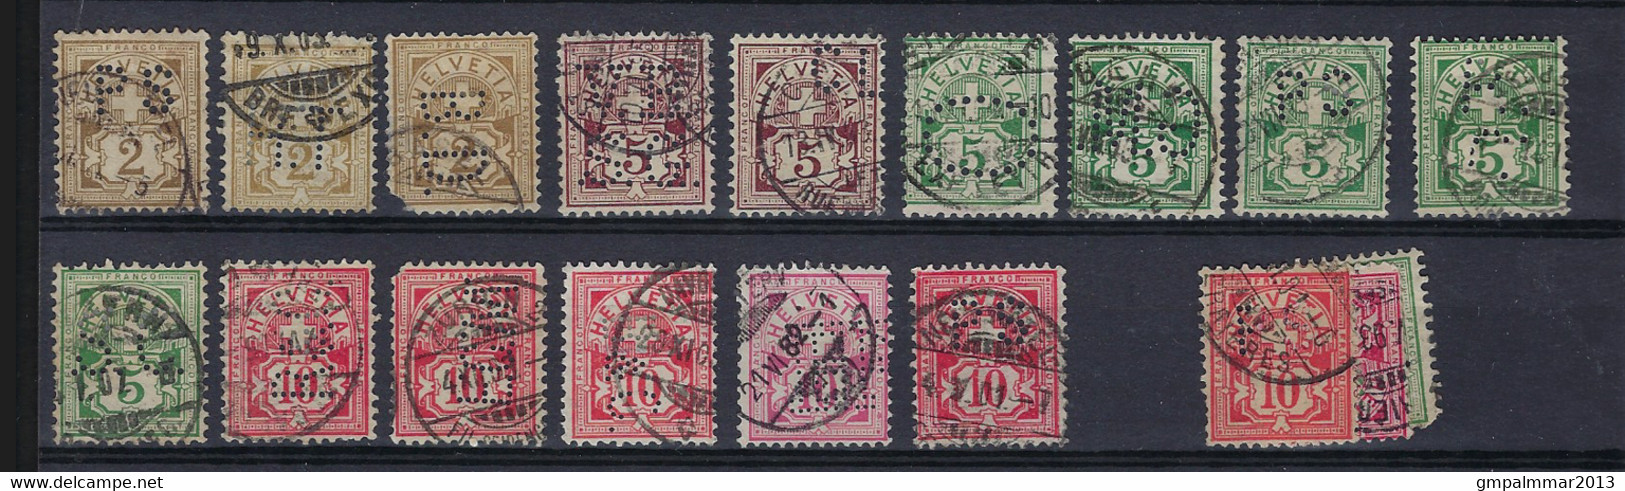 PERFIN / PERFO Suisse  /  Switzerland  1883   15  Stamps All Different Combinations ; Details See 2 Scans ! LOT 105 - Perfins